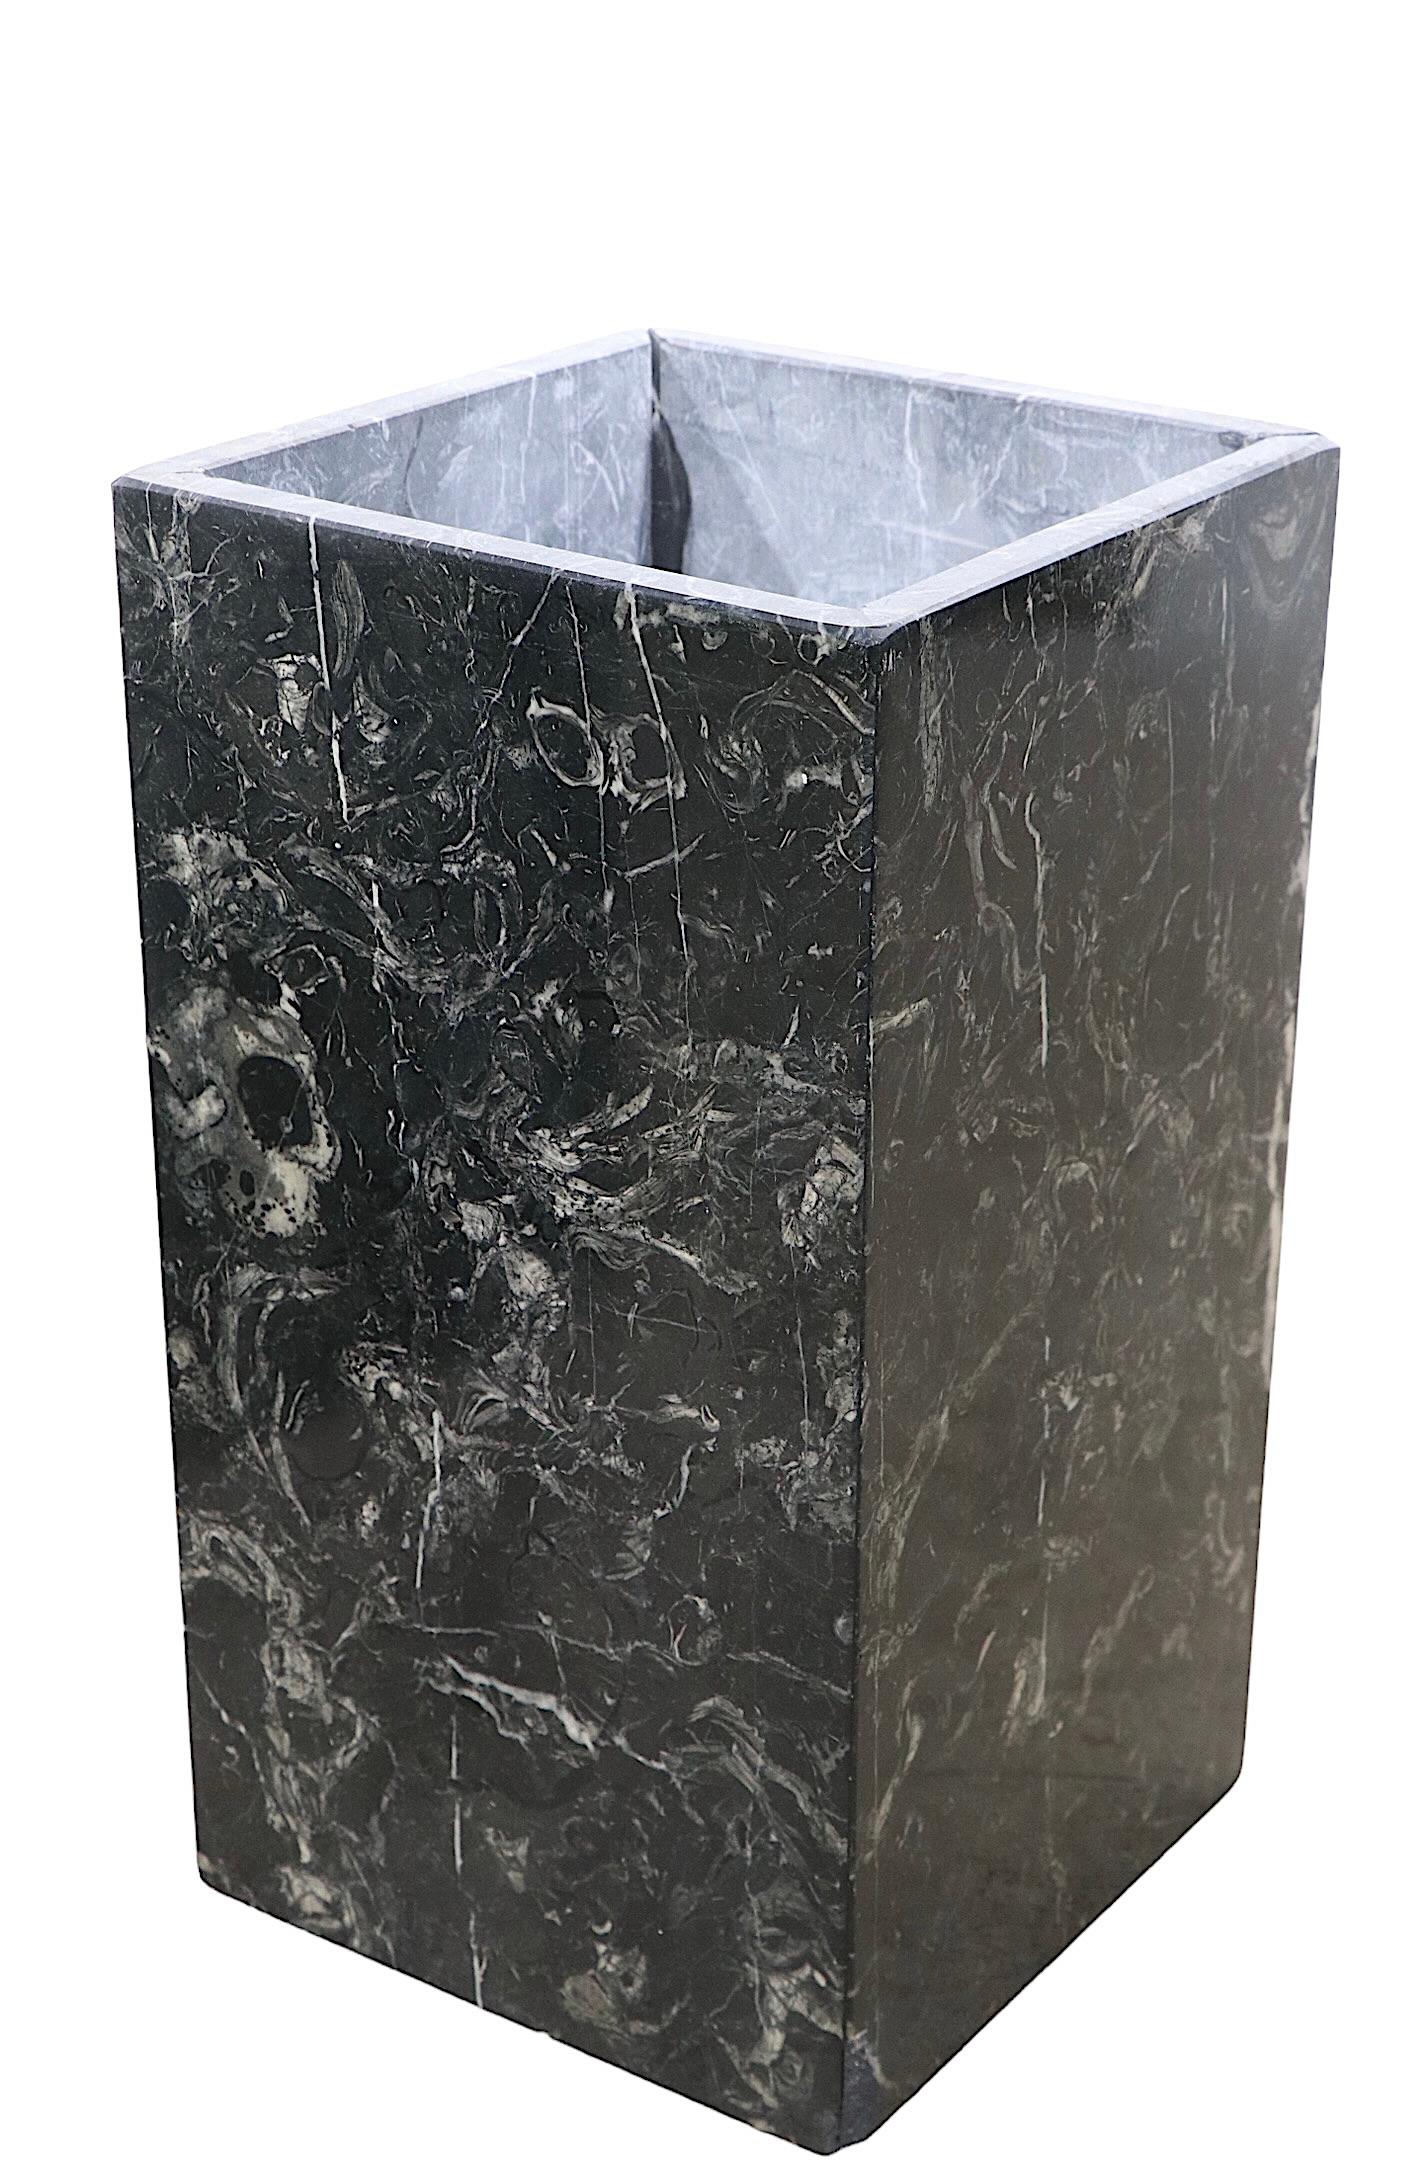 2 Black Marble Pedestal Bases Planters Table Bases c 1960/1970's For Sale 9